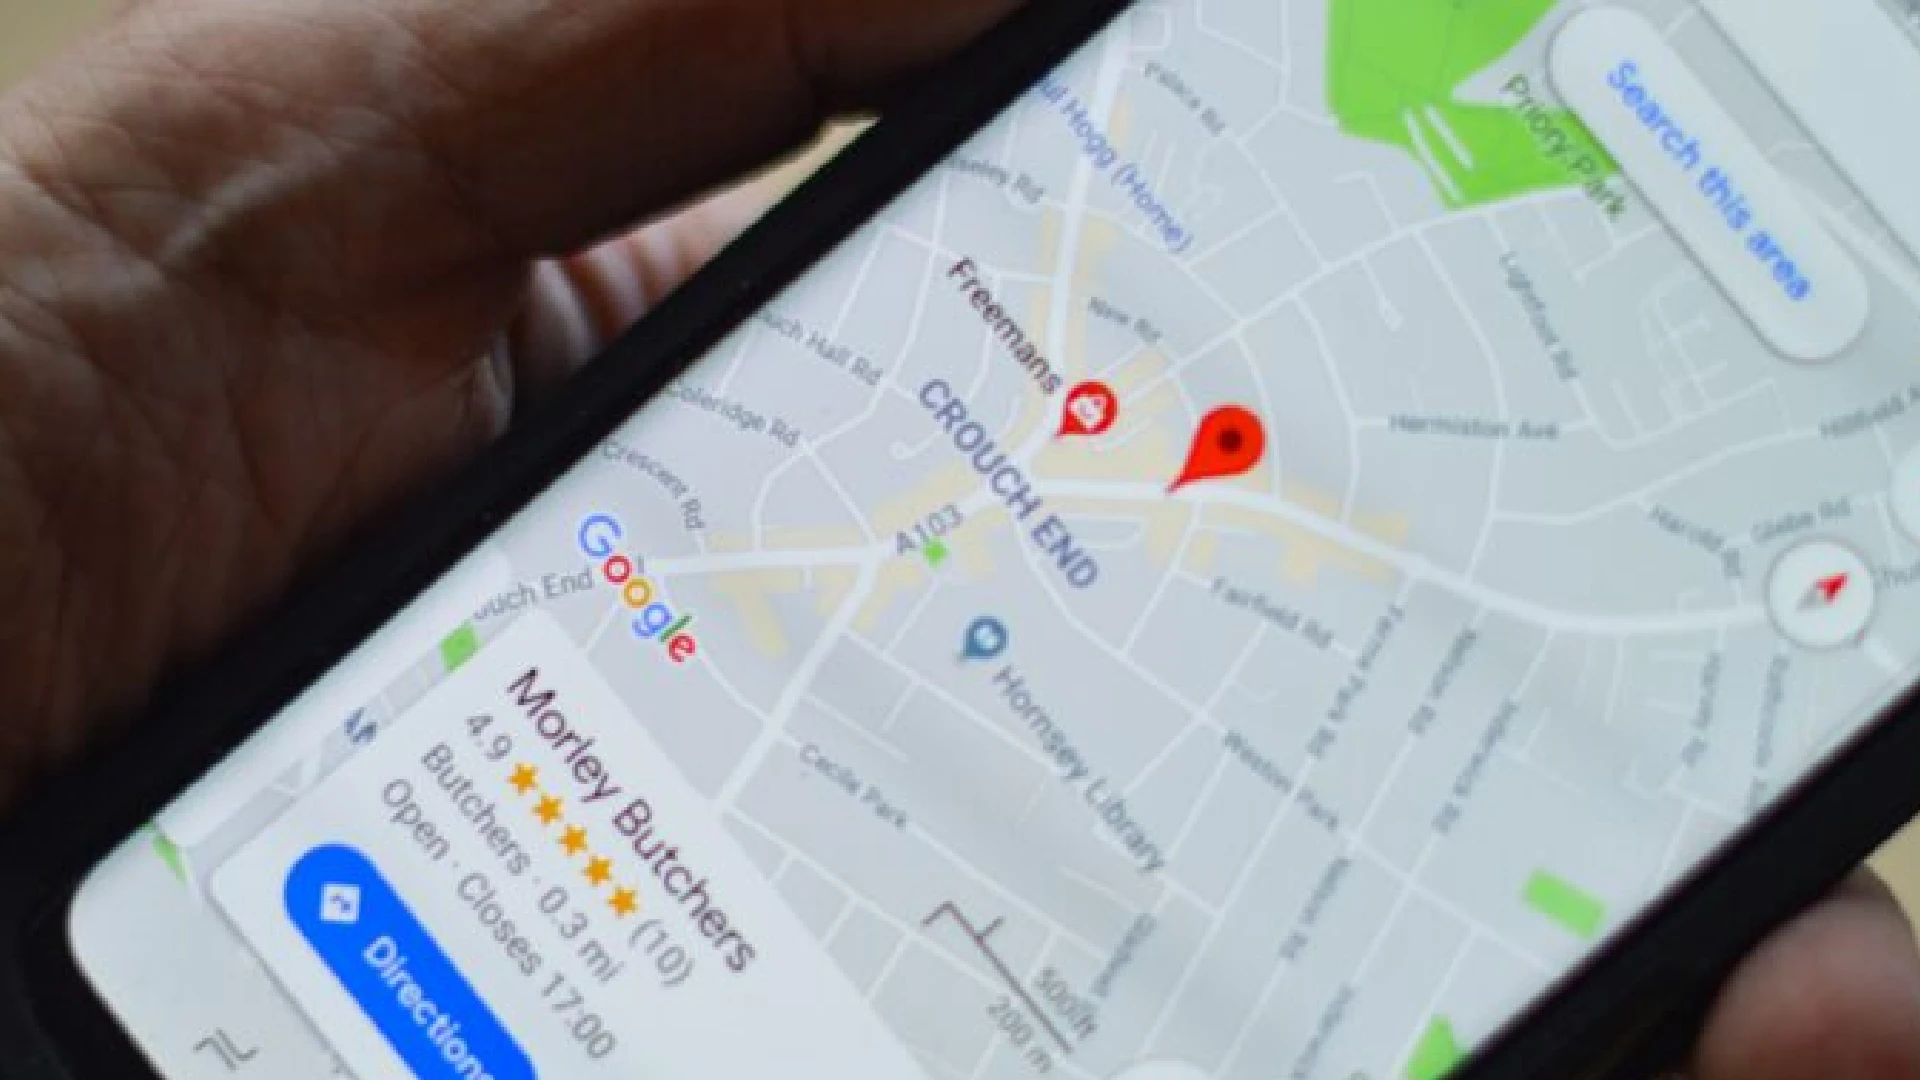 Google Maps Is Testing A Brand-New Feature Which Allows Users To Dock Locations